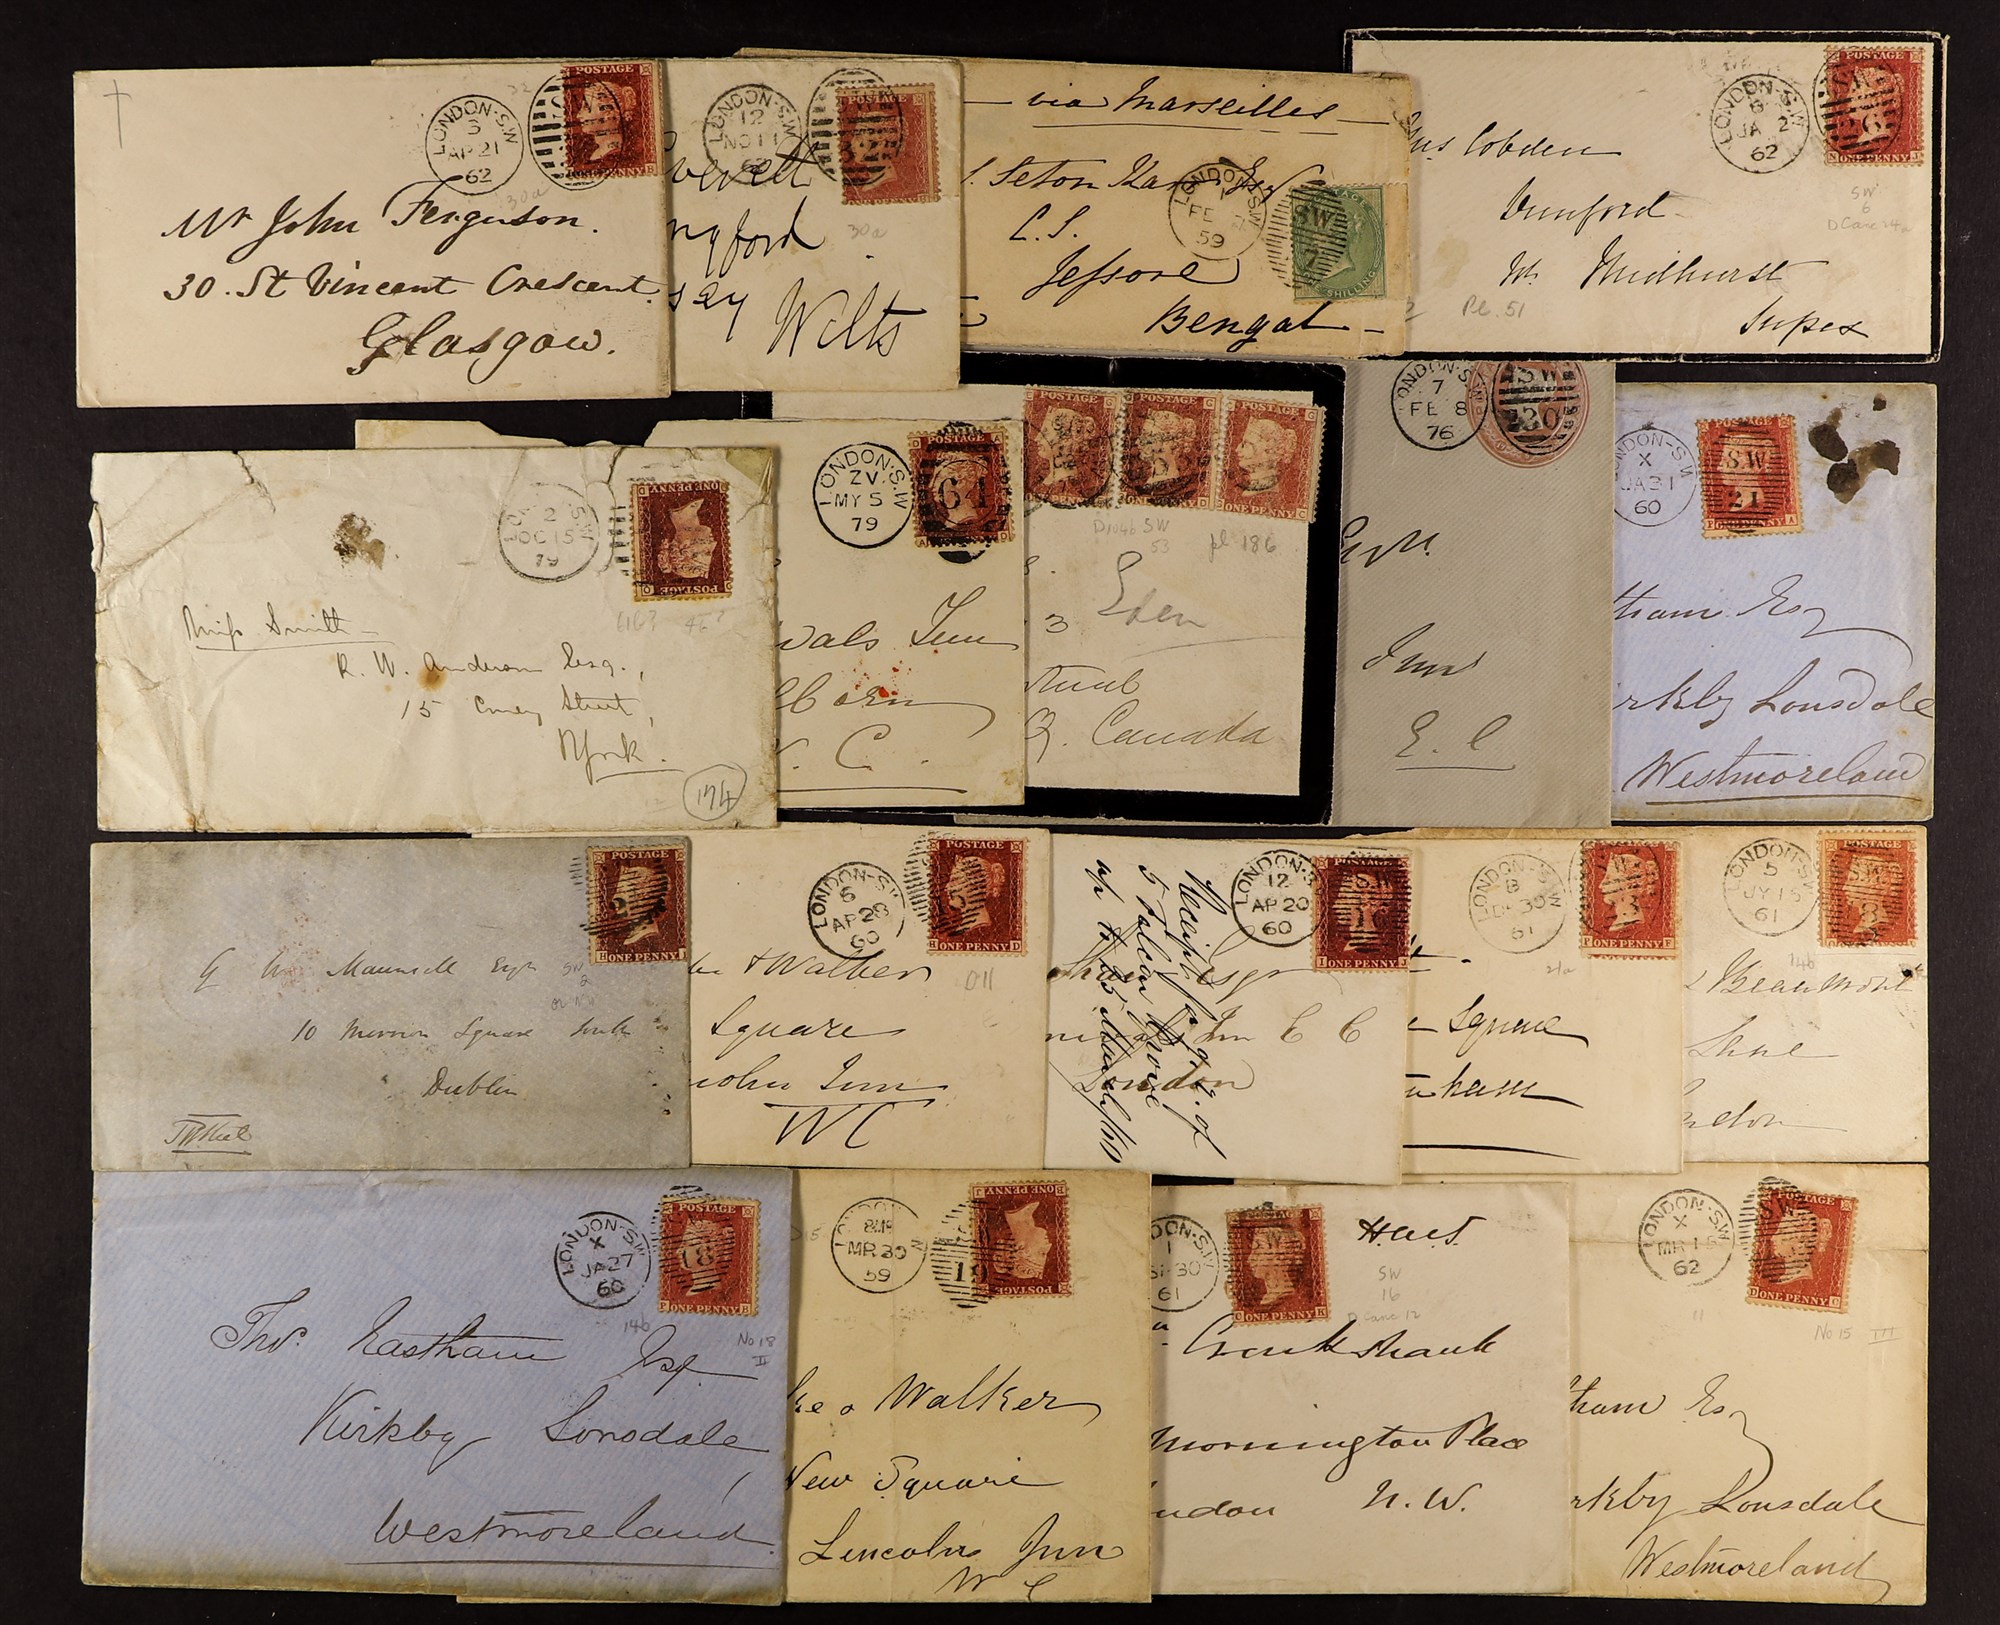 GB.QUEEN VICTORIA 1858 - 1879 COVERS - LONDON SOUTH WESTERN DISTRICT OFFICE. 65 covers with stamps - Image 2 of 4